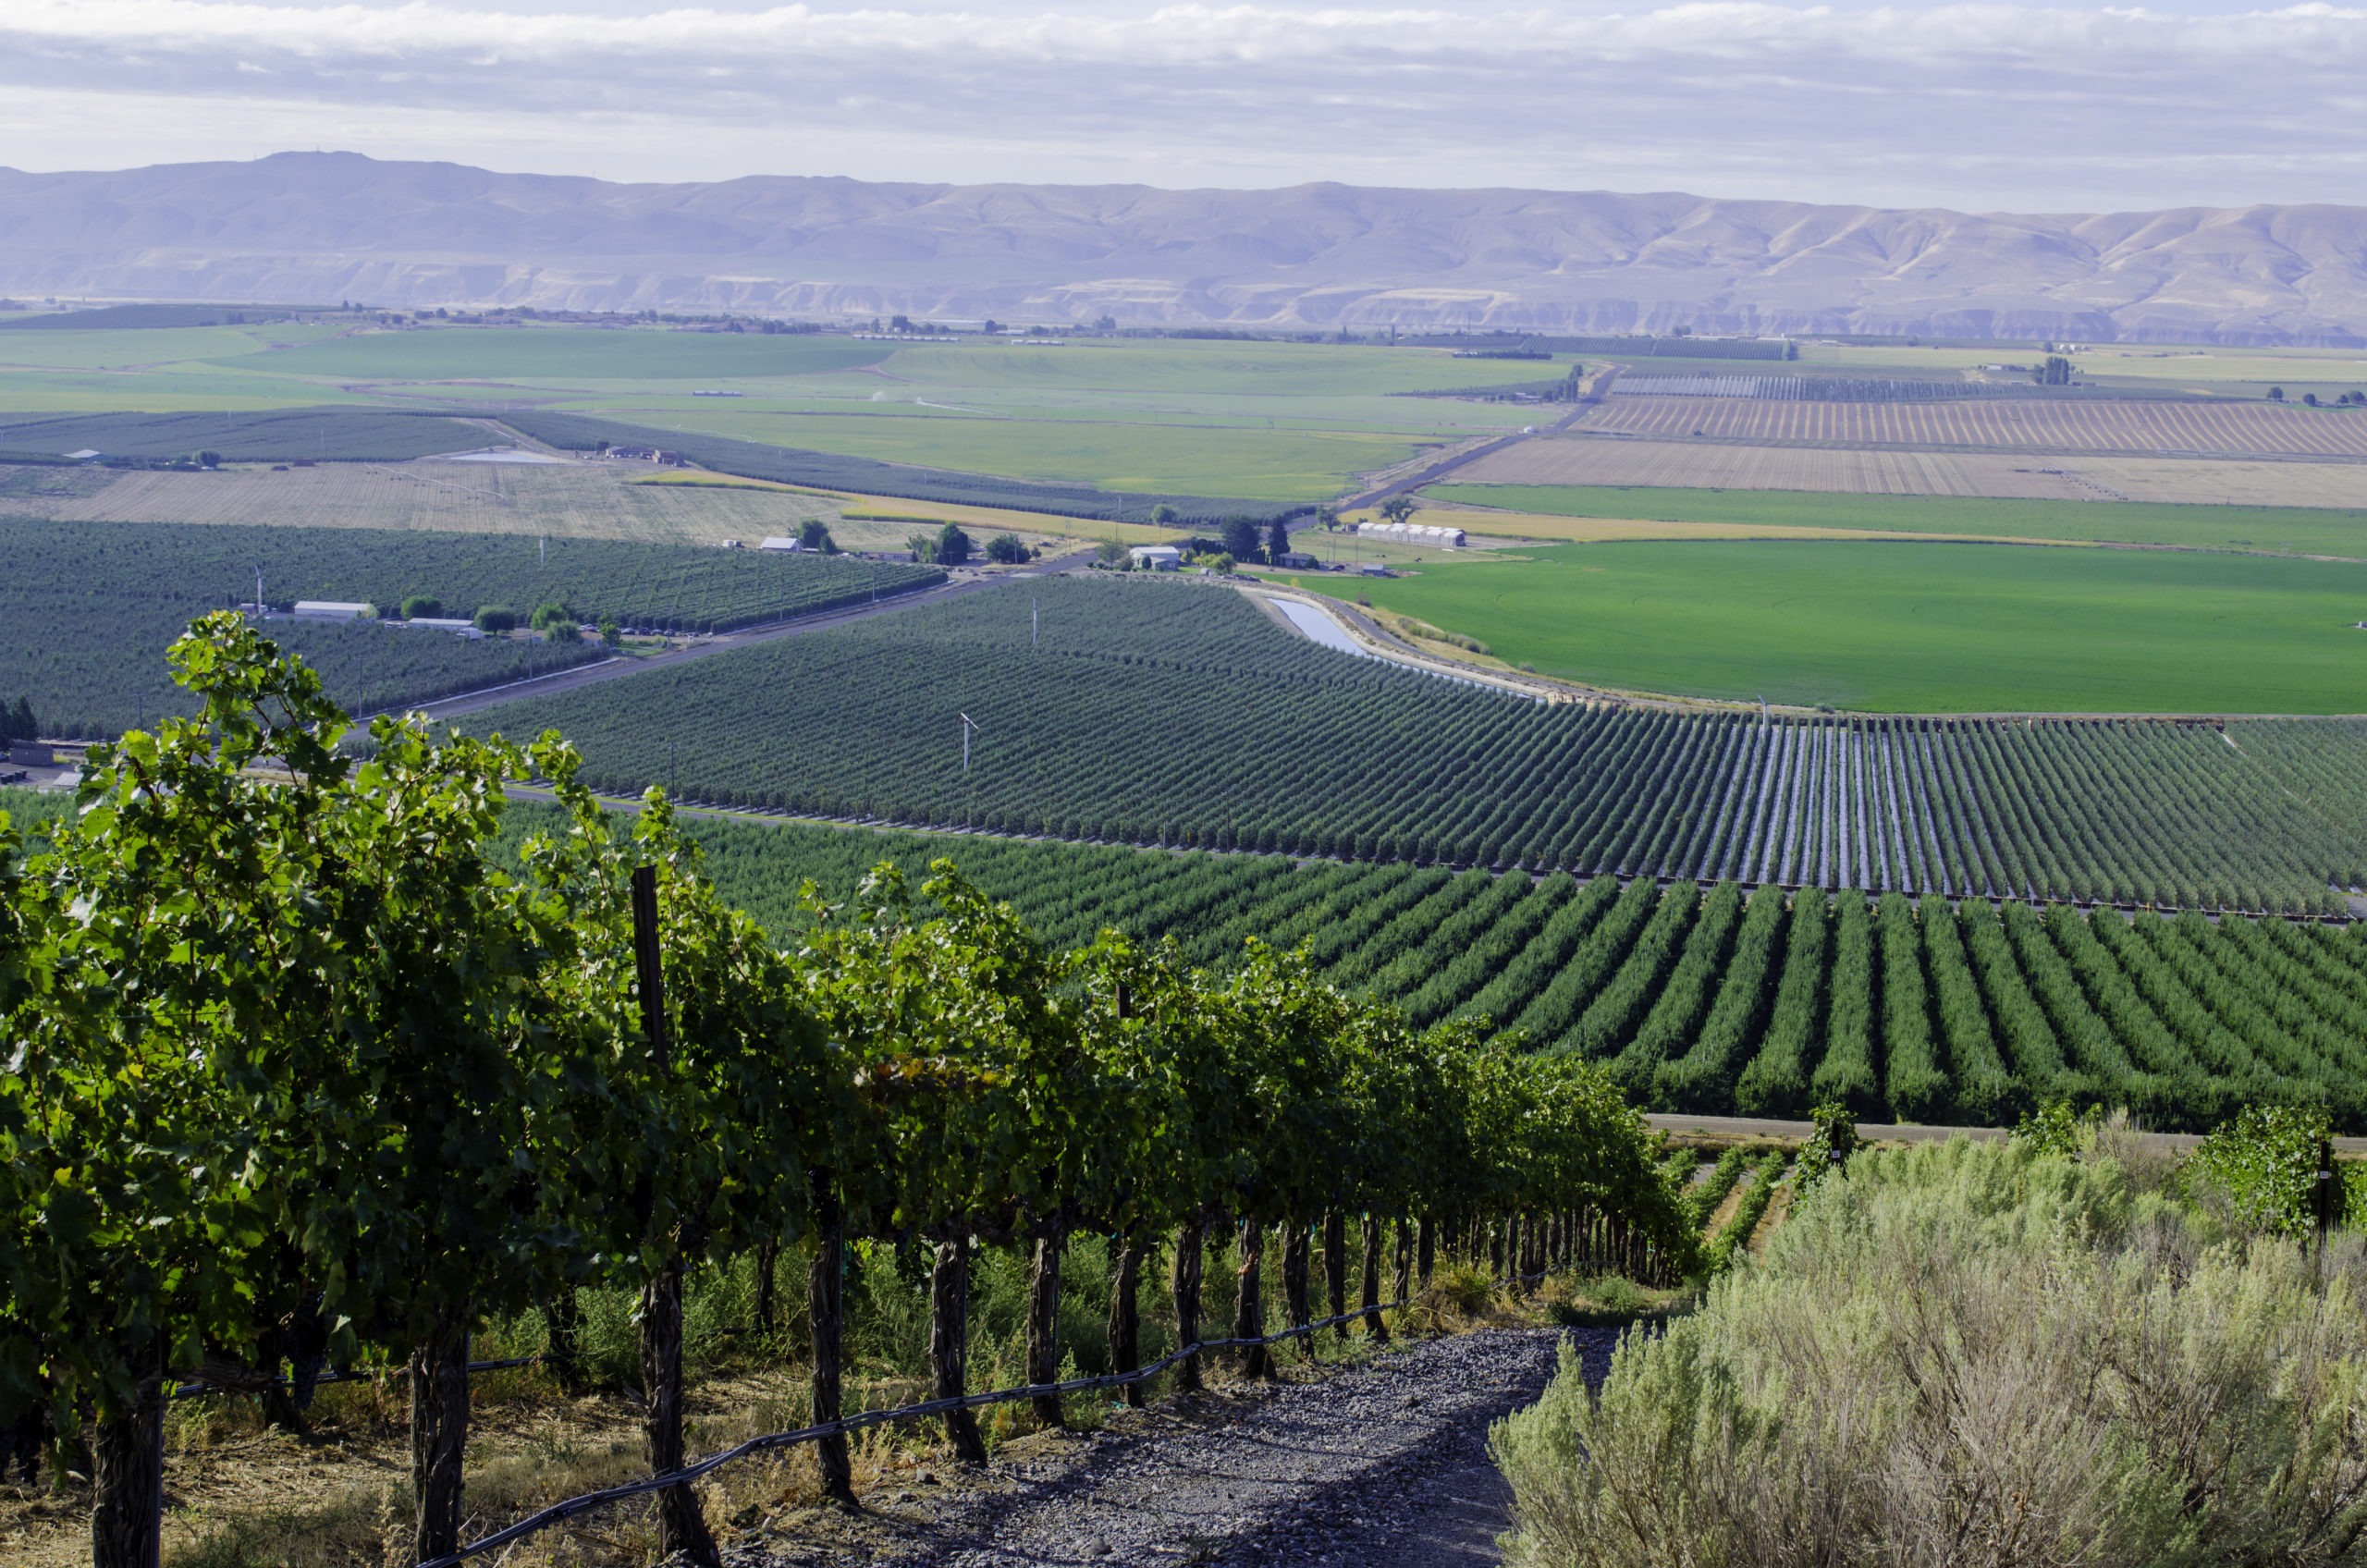 The new Royal Slope American Viticultural Area is around 156,000 acres, north of the Tri-Cities